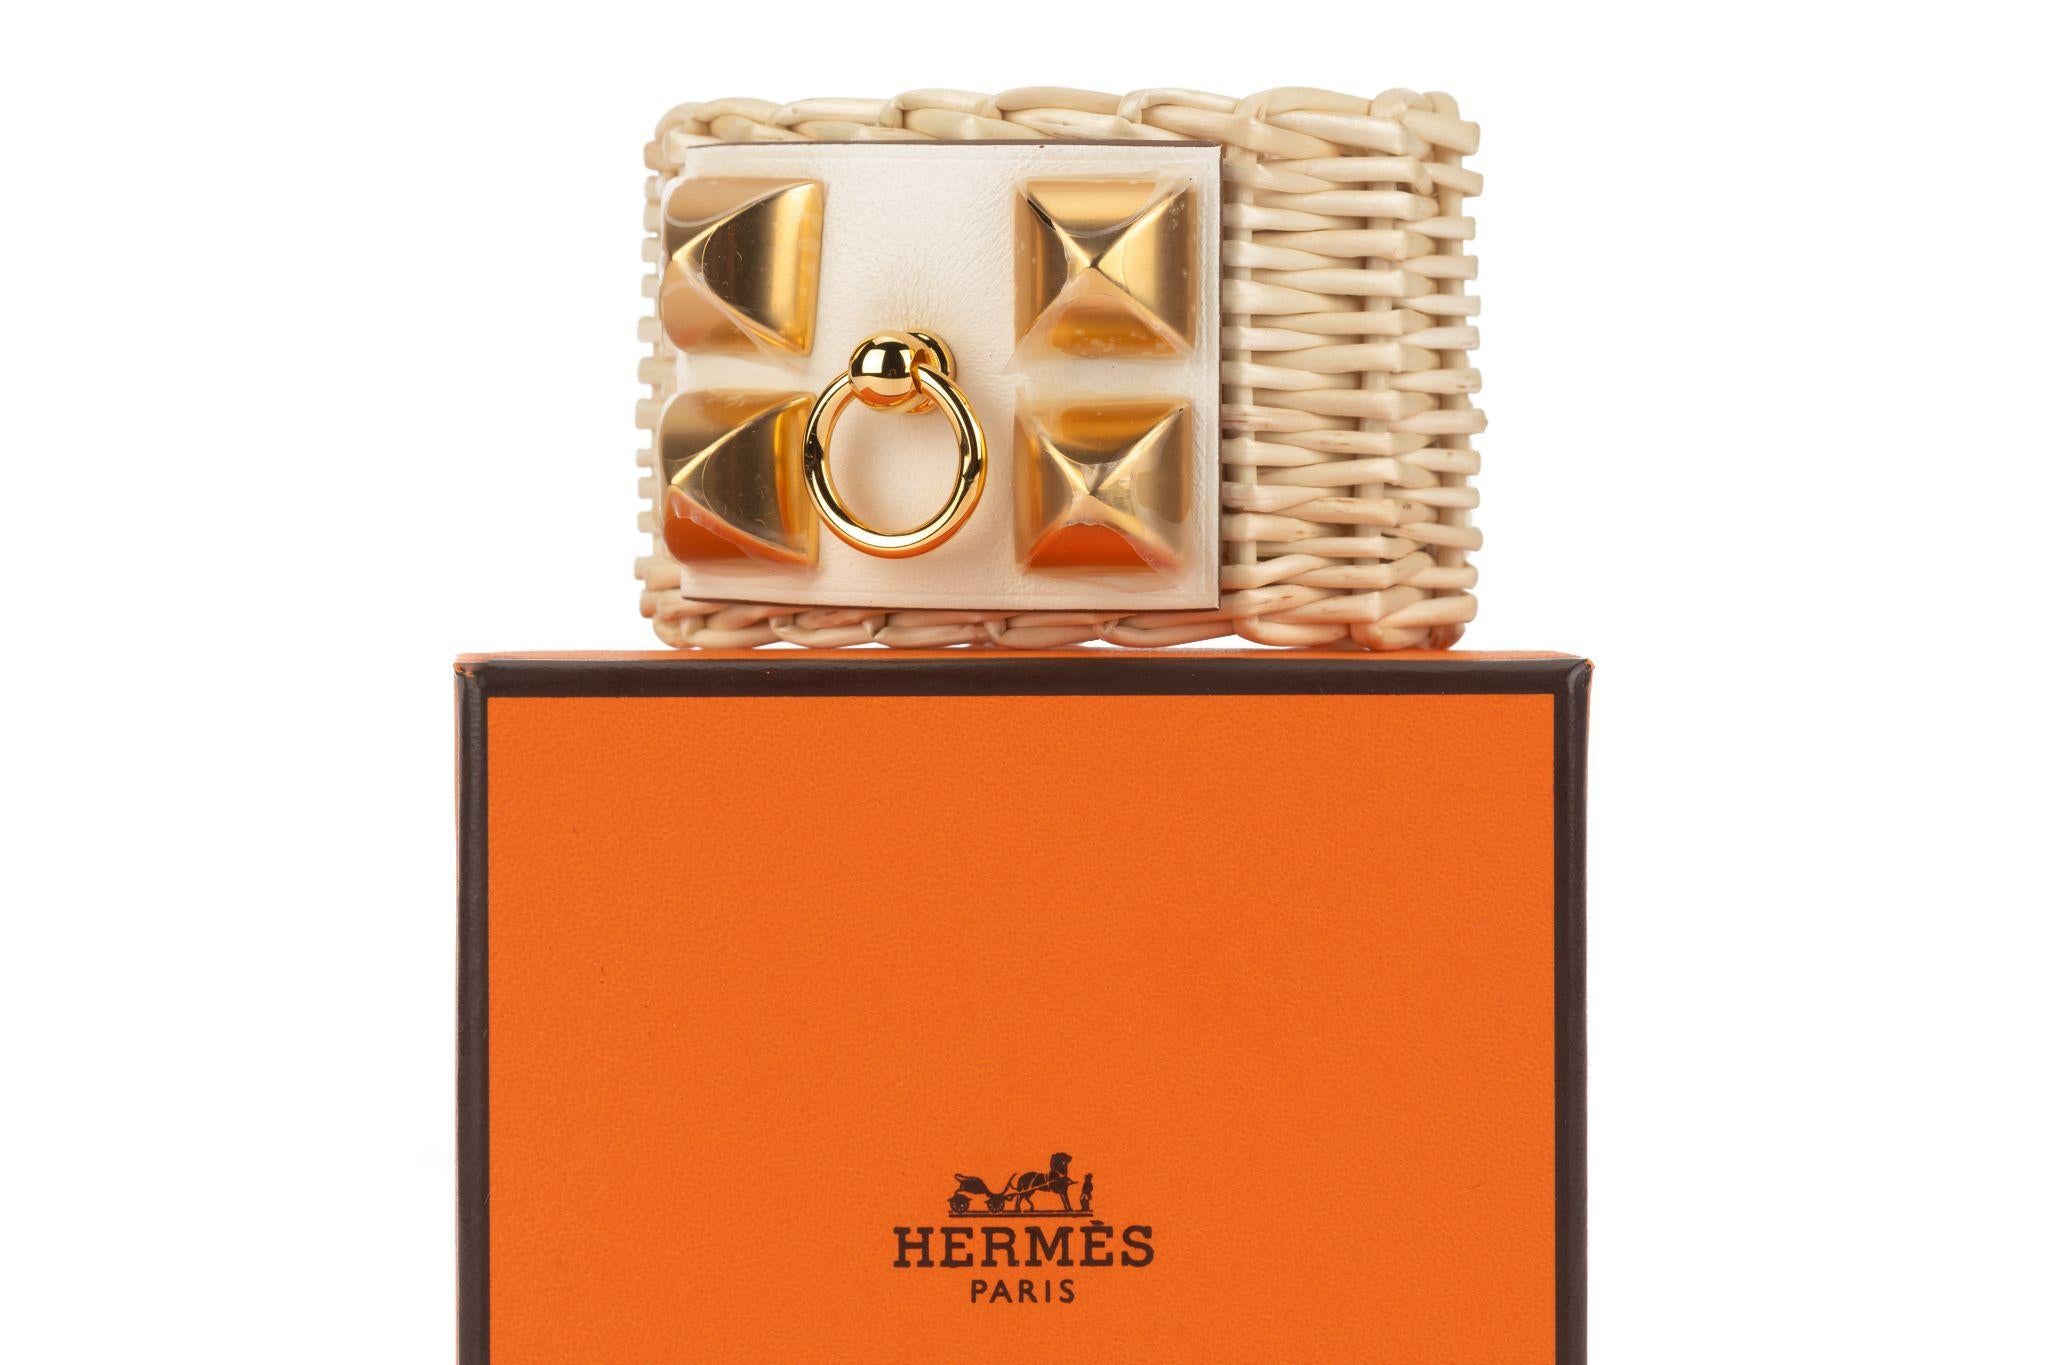 Hermès Natural Wicker cuff bracelet with nata leather feature and golden studs. Size t2. The piece is in new condition and comes with dust cover, booklet, box and ribbon. Plastic on hardware.